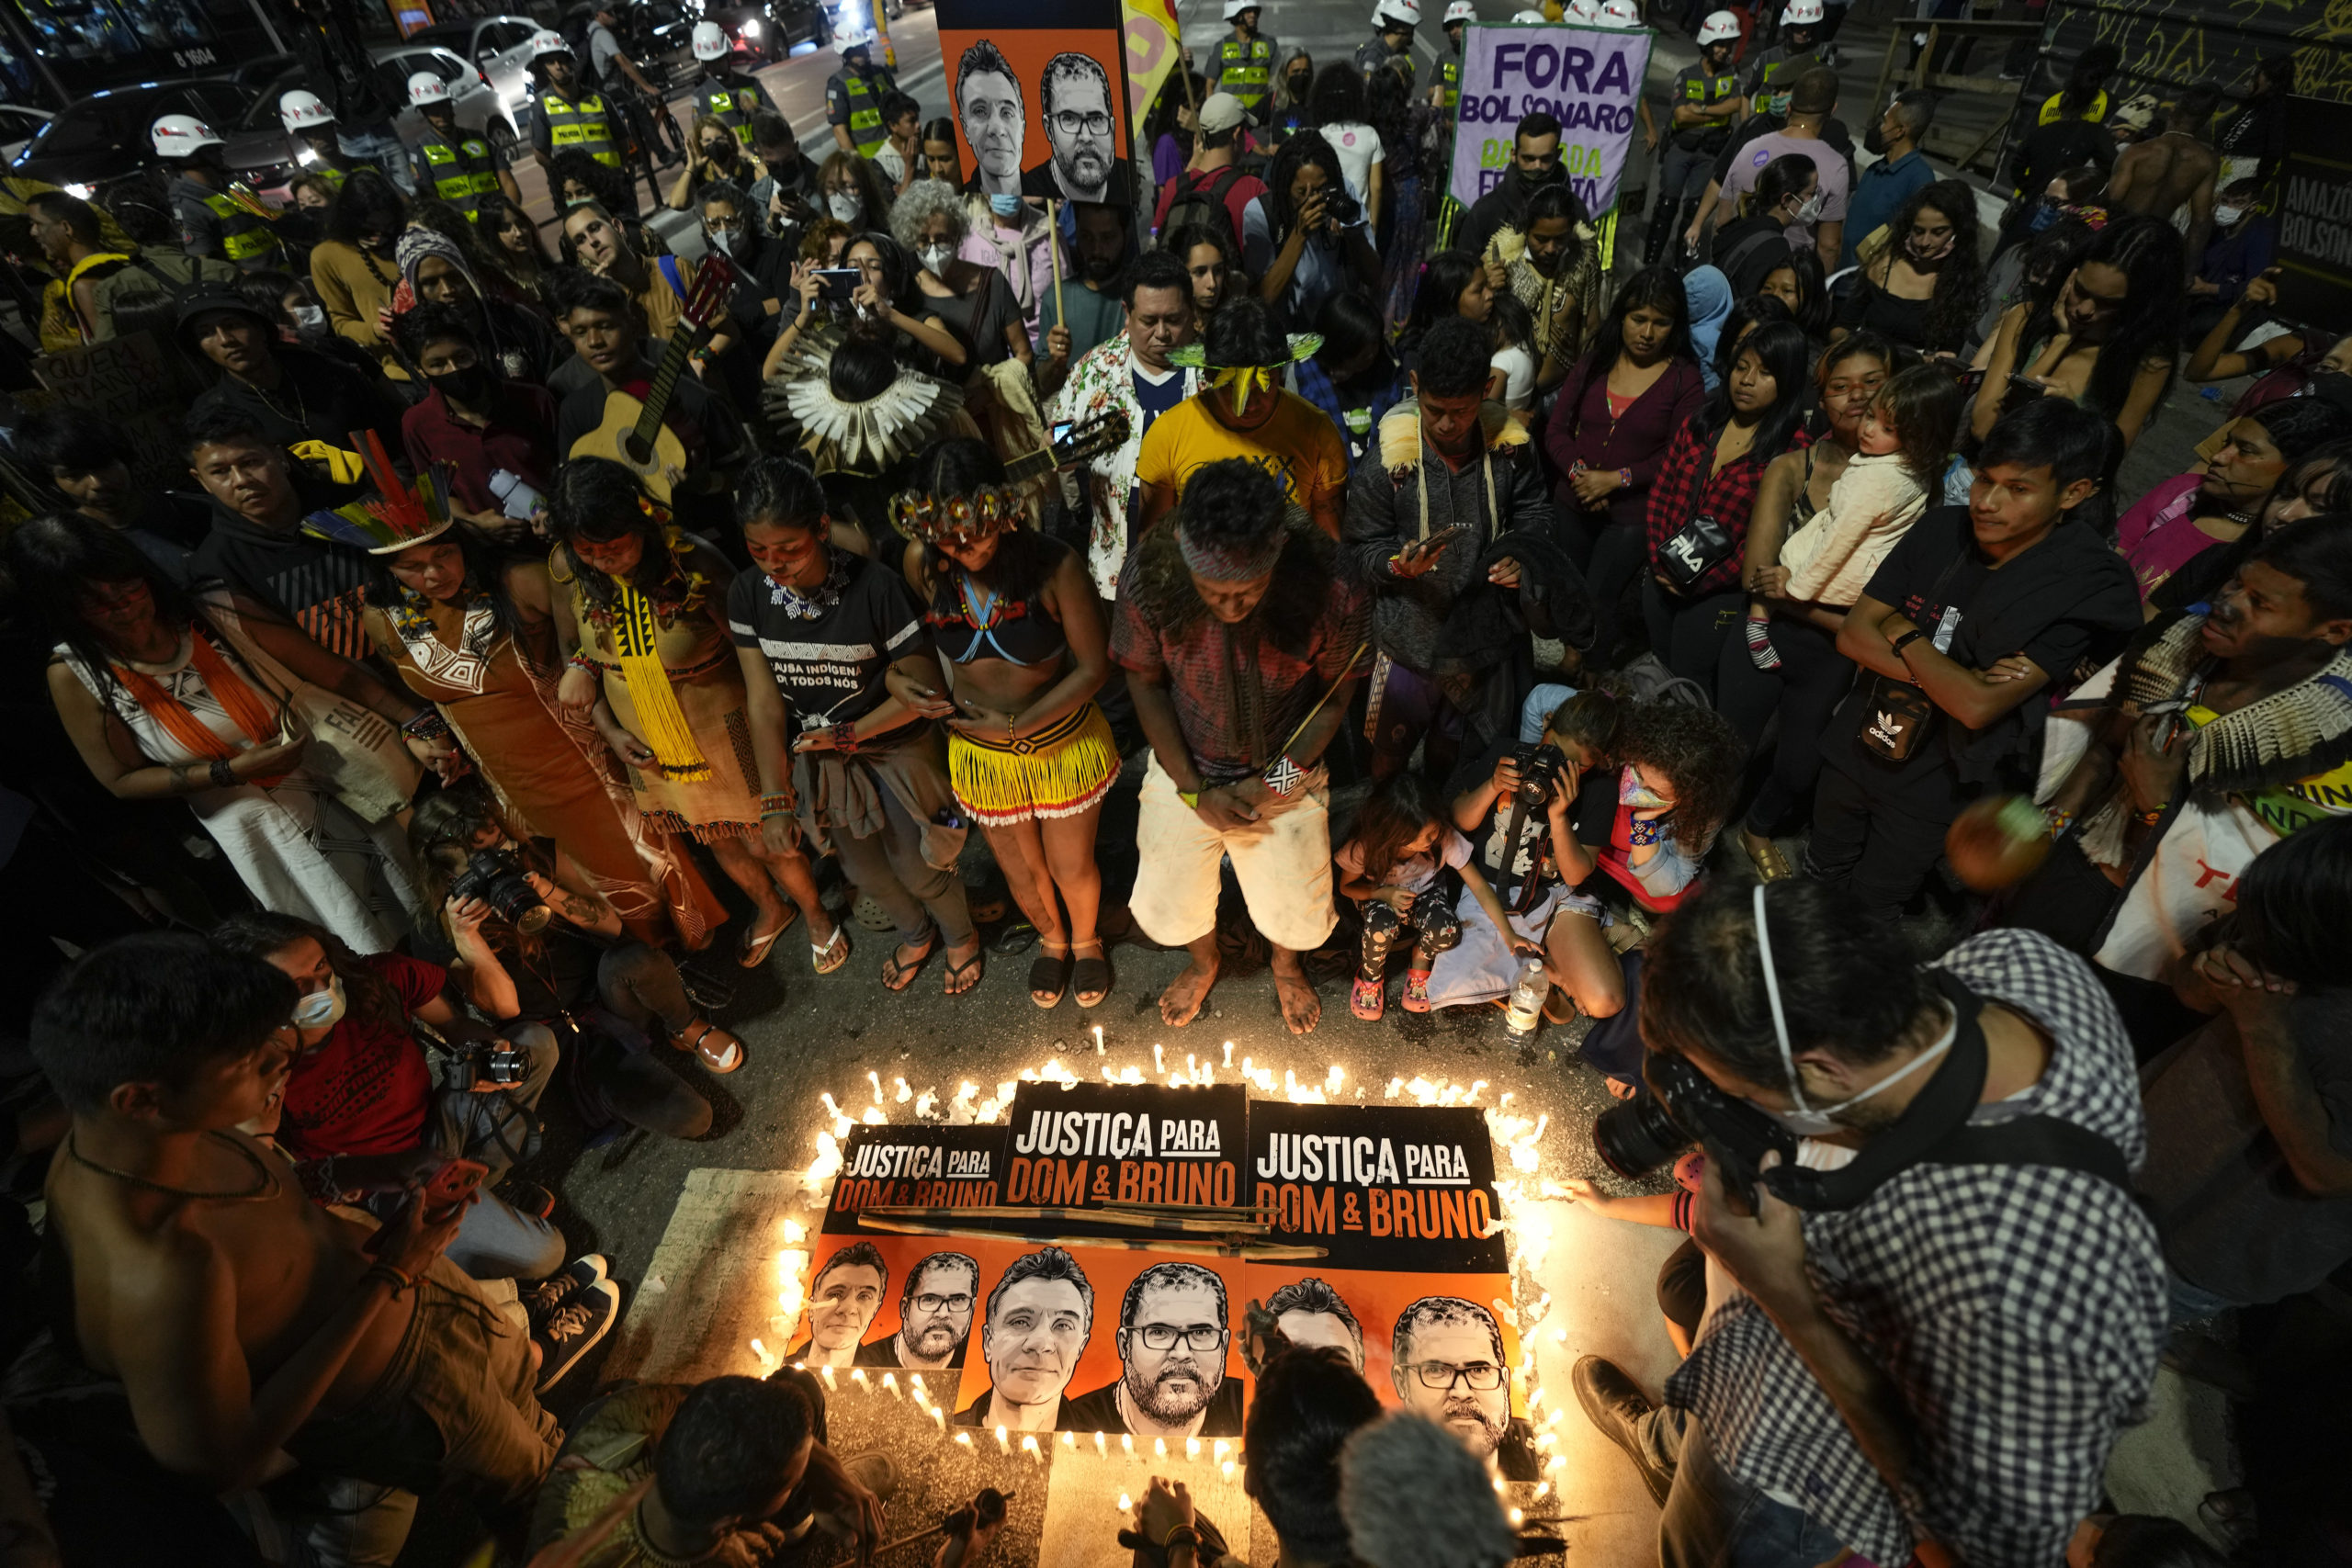 A crowd of Indigenous people gather around a memorial for Dom Phillips and Bruno Pereira. The memorial has three posters, each with Dom and Bruno's face on it, reading "Justiça Para Dom e Bruno" (Translates to Justice for Dom and Bruno), and is surrounded by candles. Toward the back of the crowd, someone holds an enlarged poster of Dom and Bruno; someone else holds a banner that says "Fora Bolsonaro" (Bolsonaro Out).Behind the crowd of Indigenous memorial goers, police wearing helmets and green vests surround them.